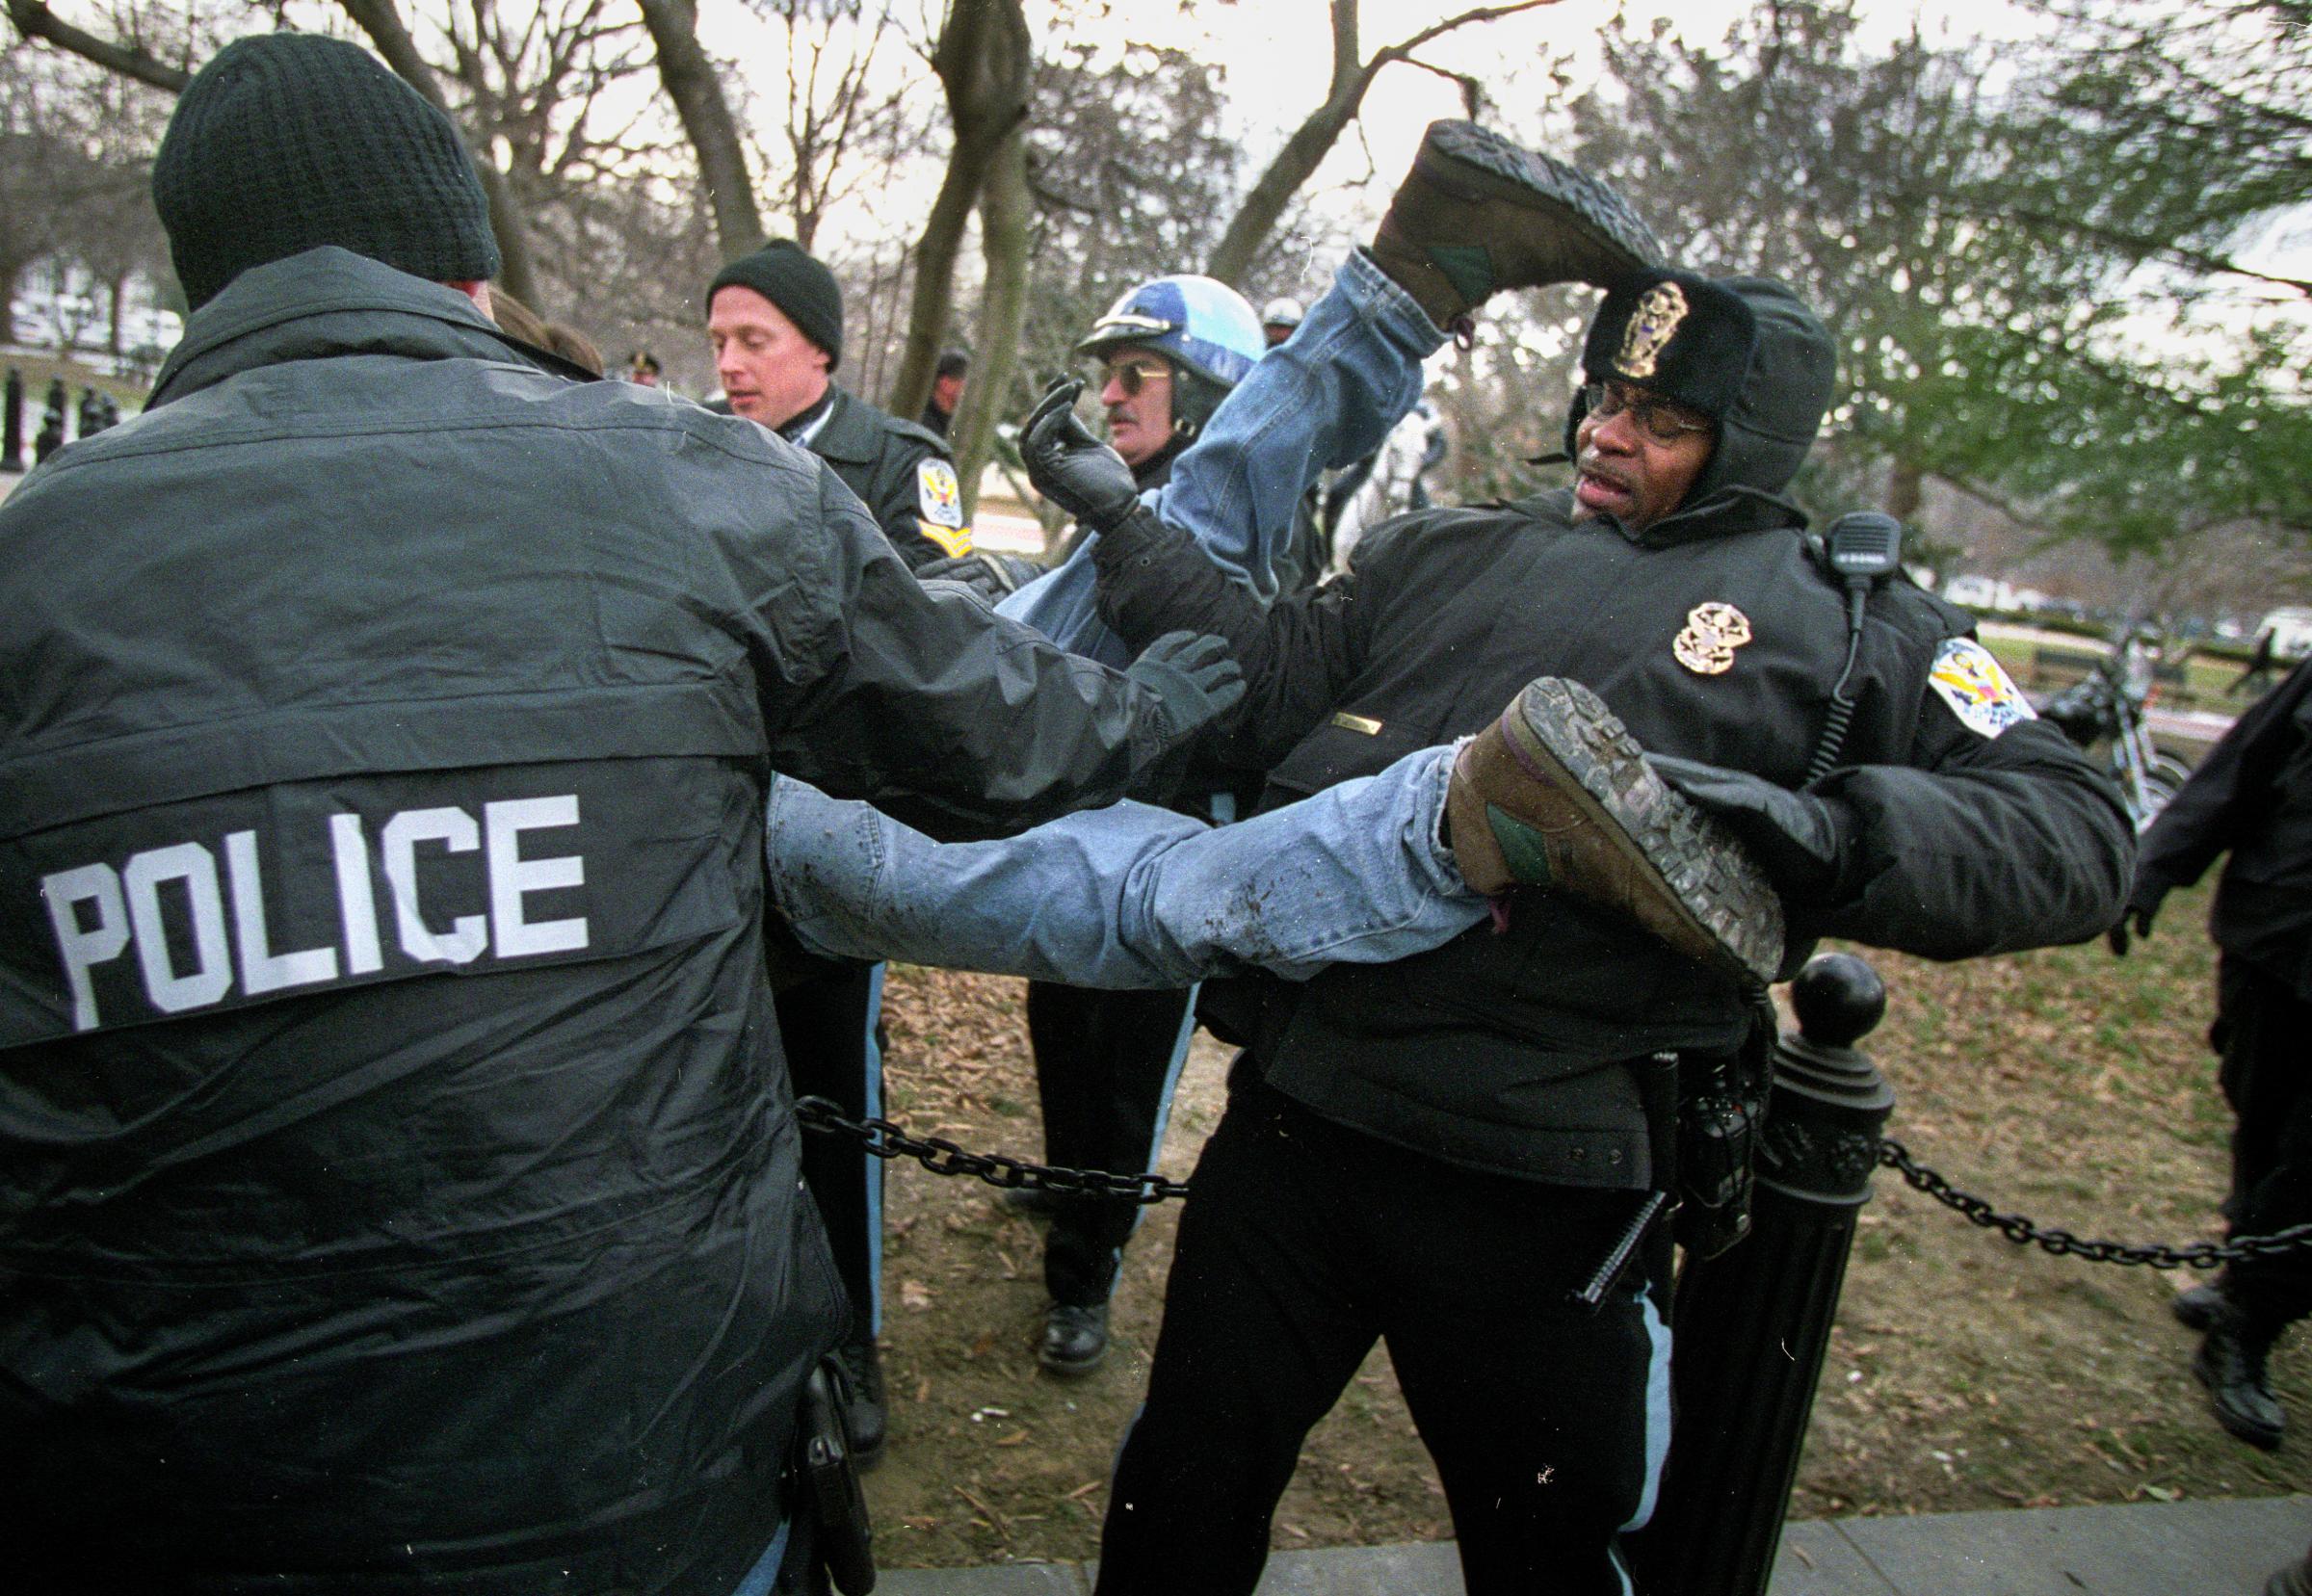 DC: City of Protests - A student protestor is tossed around and arrested after...